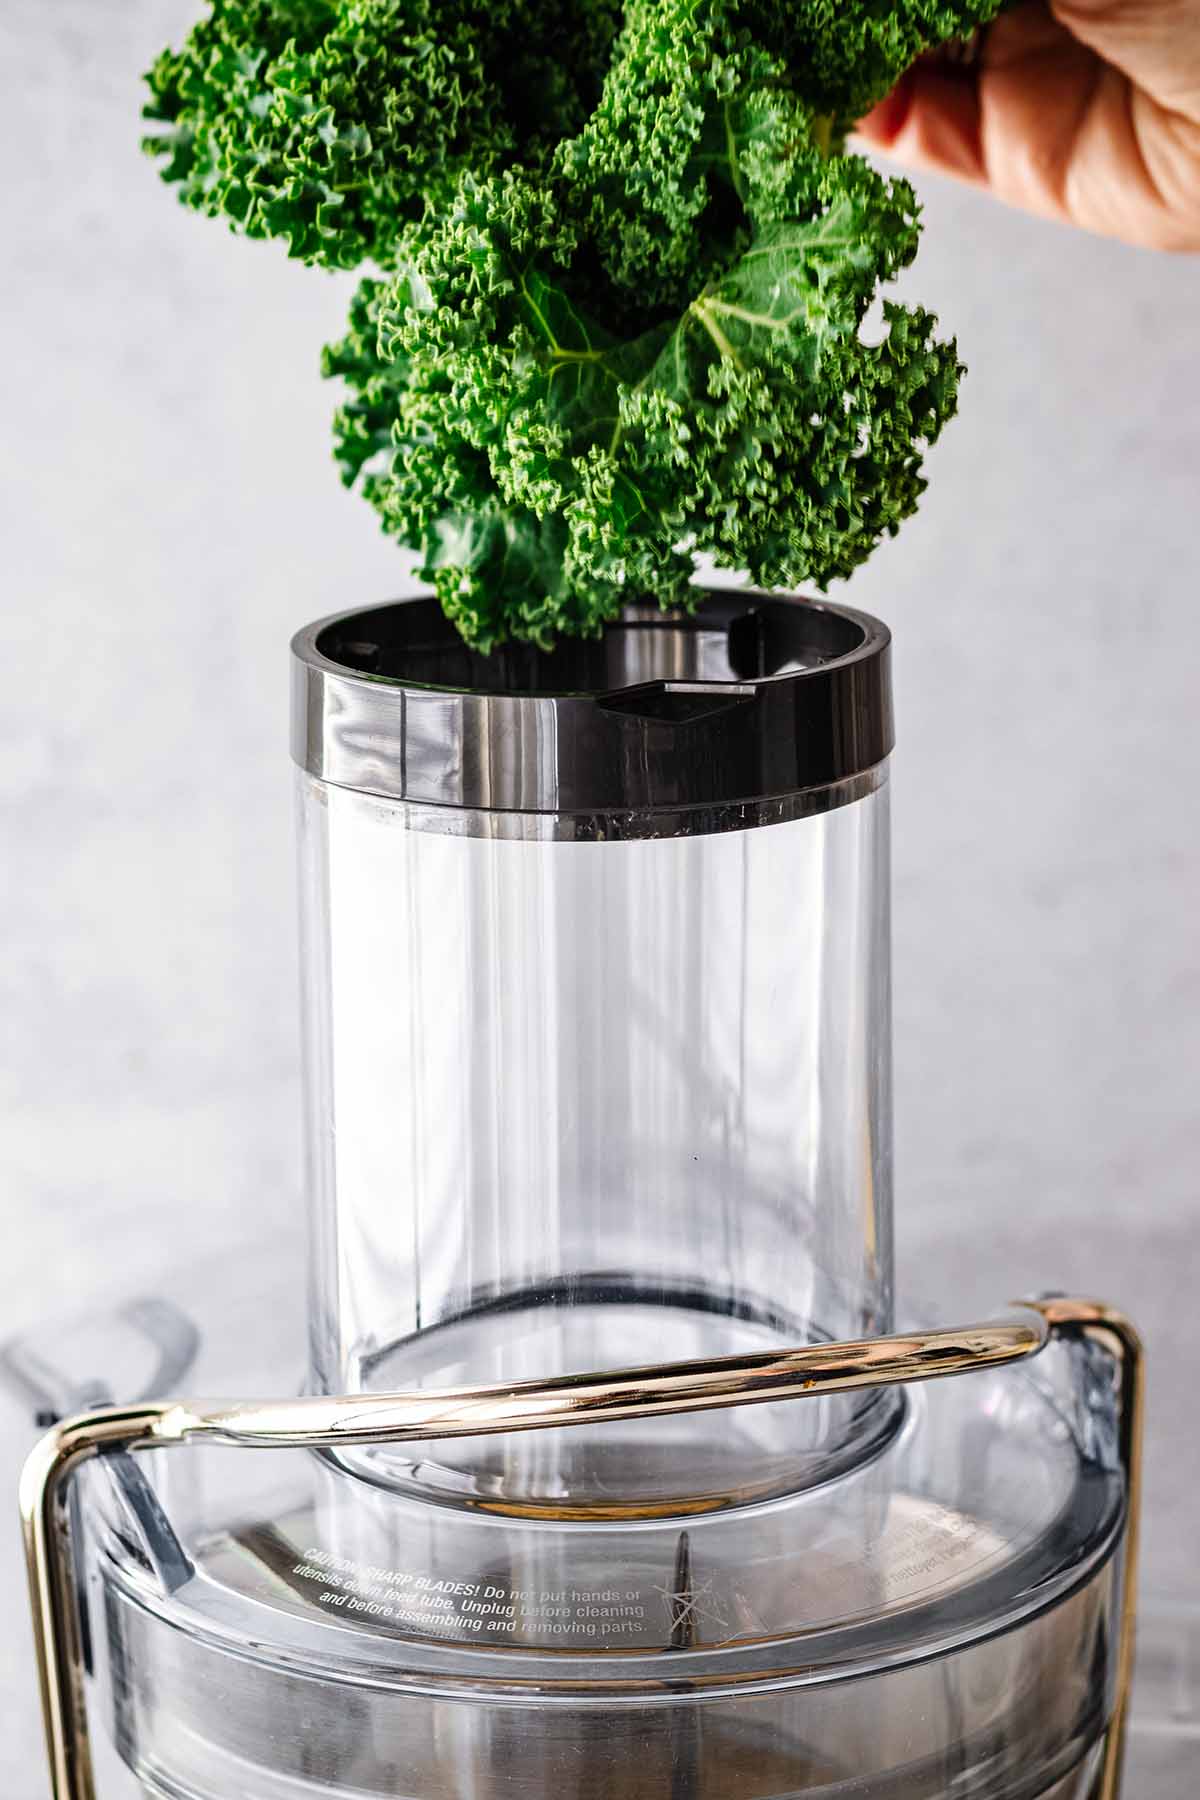 Kale being added to the chute of a juice extractor.